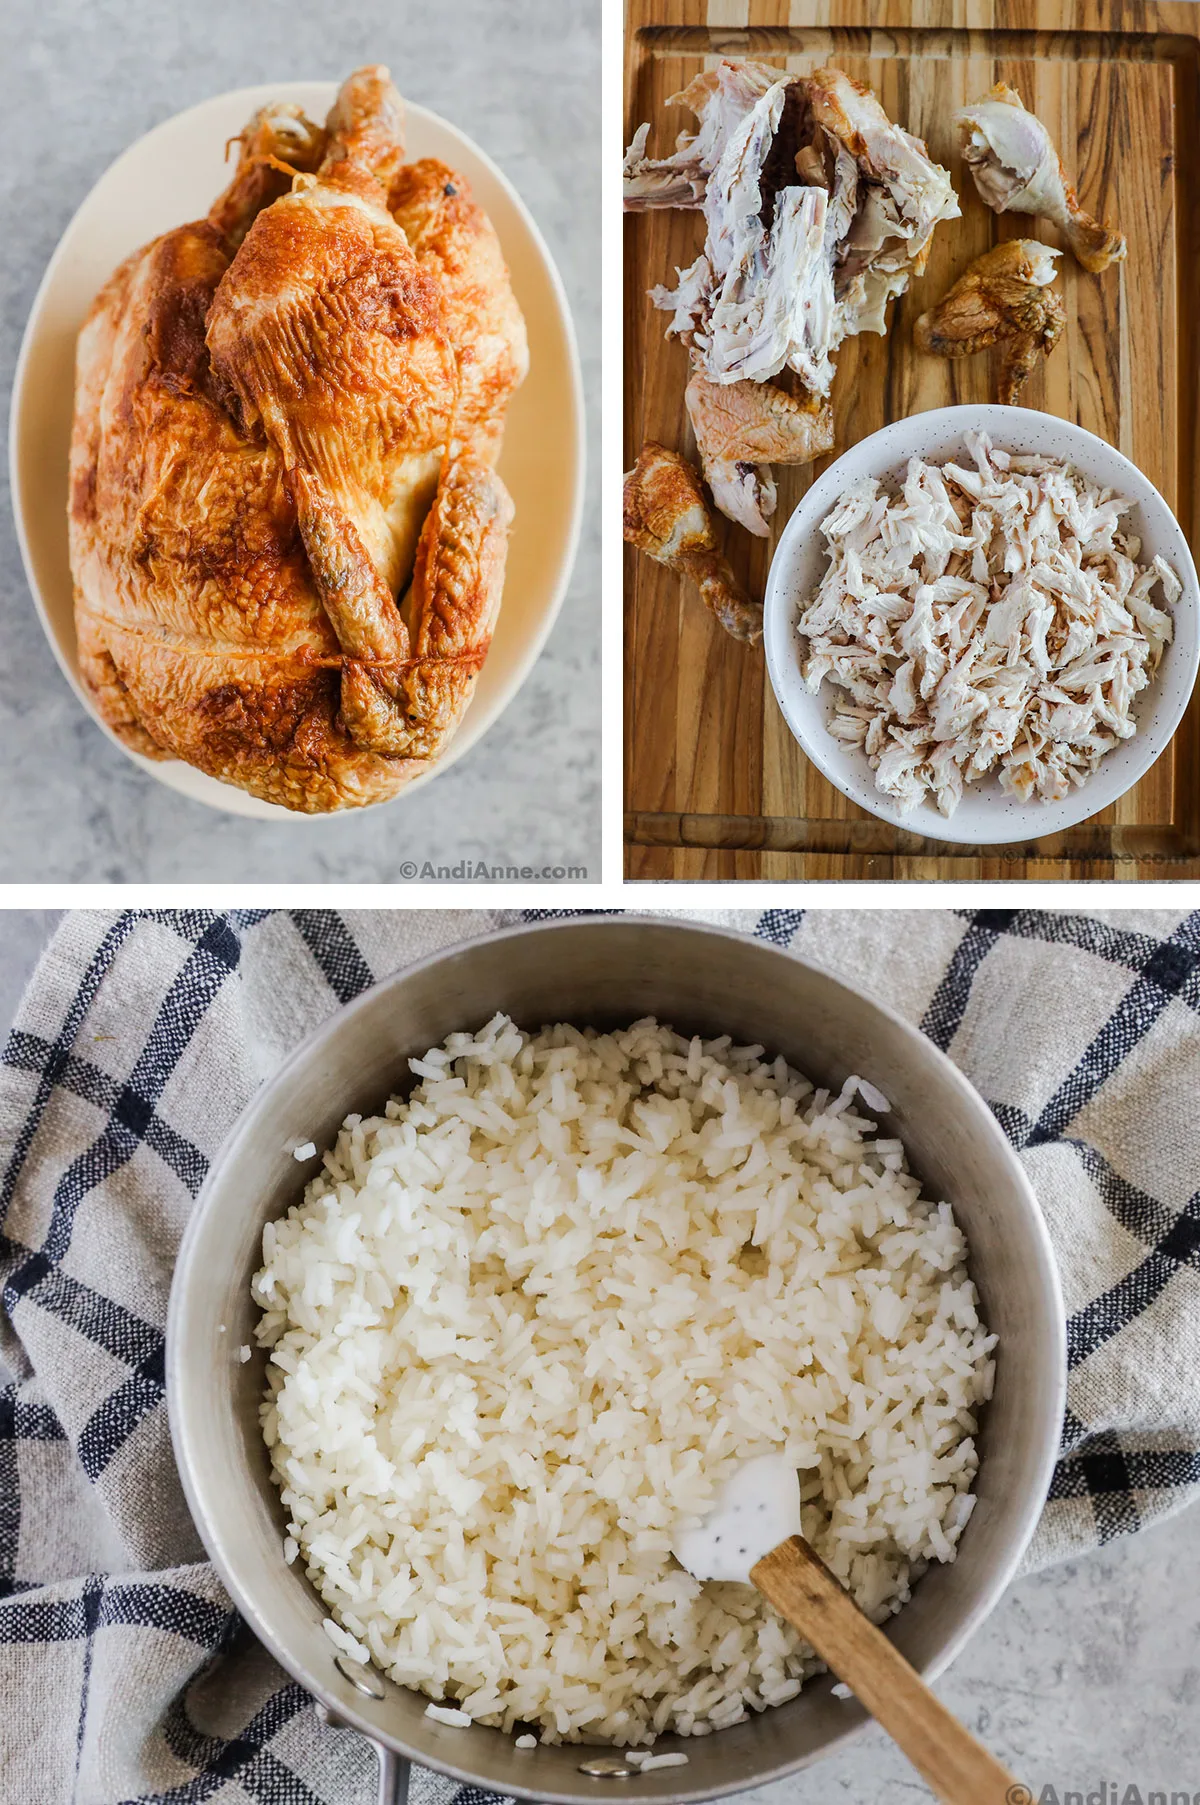 A rotisserie chicken whole, then shredded, and a pot of rice.